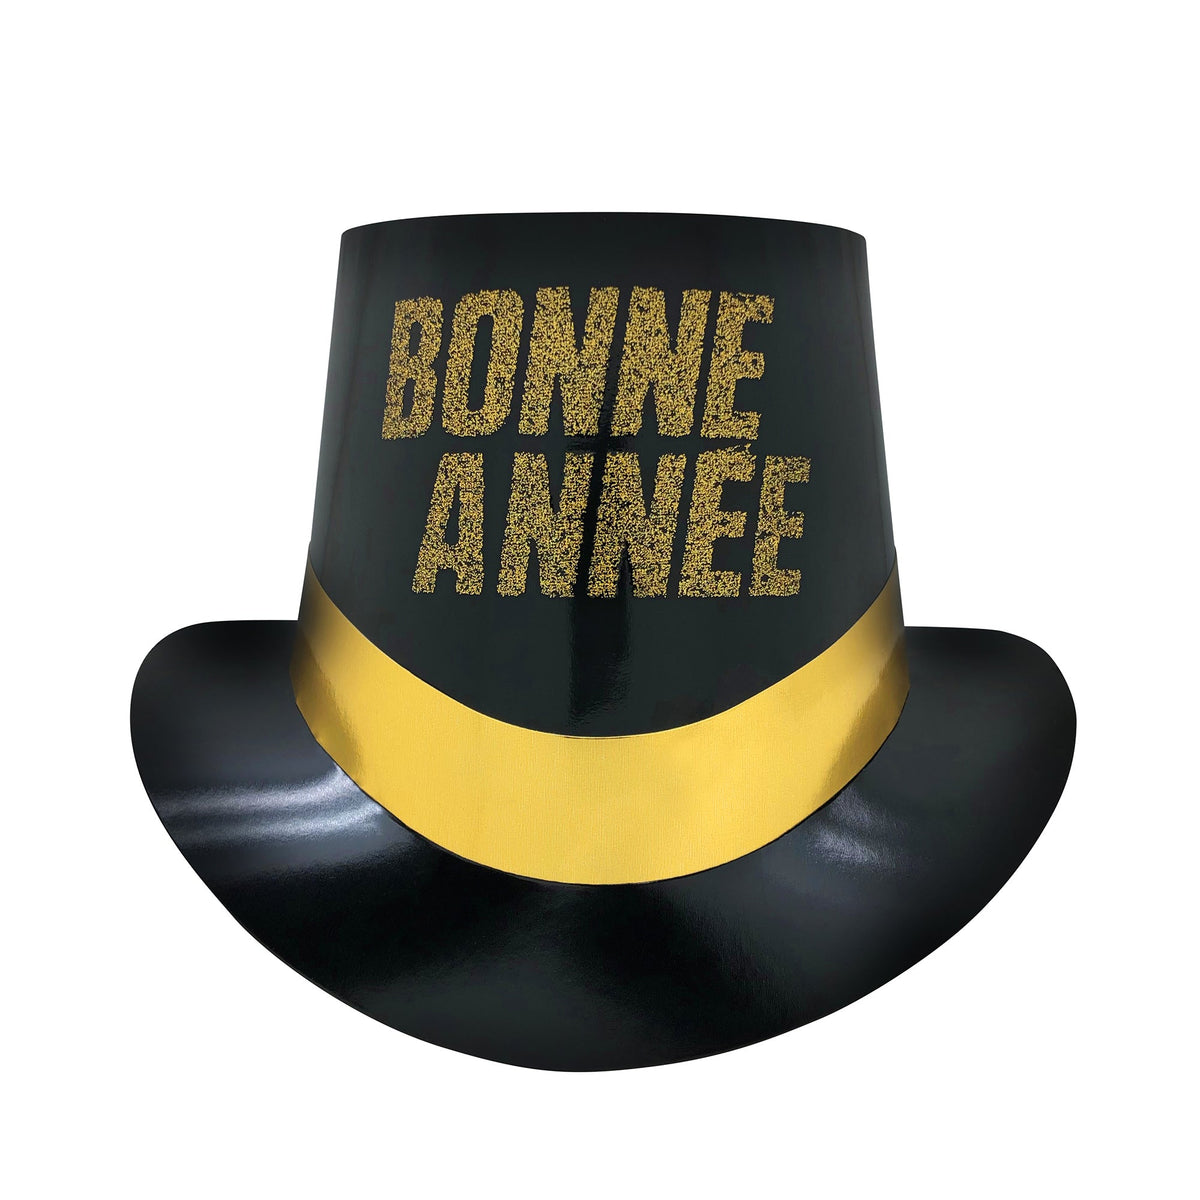 PARTY TIME MFG New Year "Bonne Année" Black Top Hat with Gold Band, 1 Count